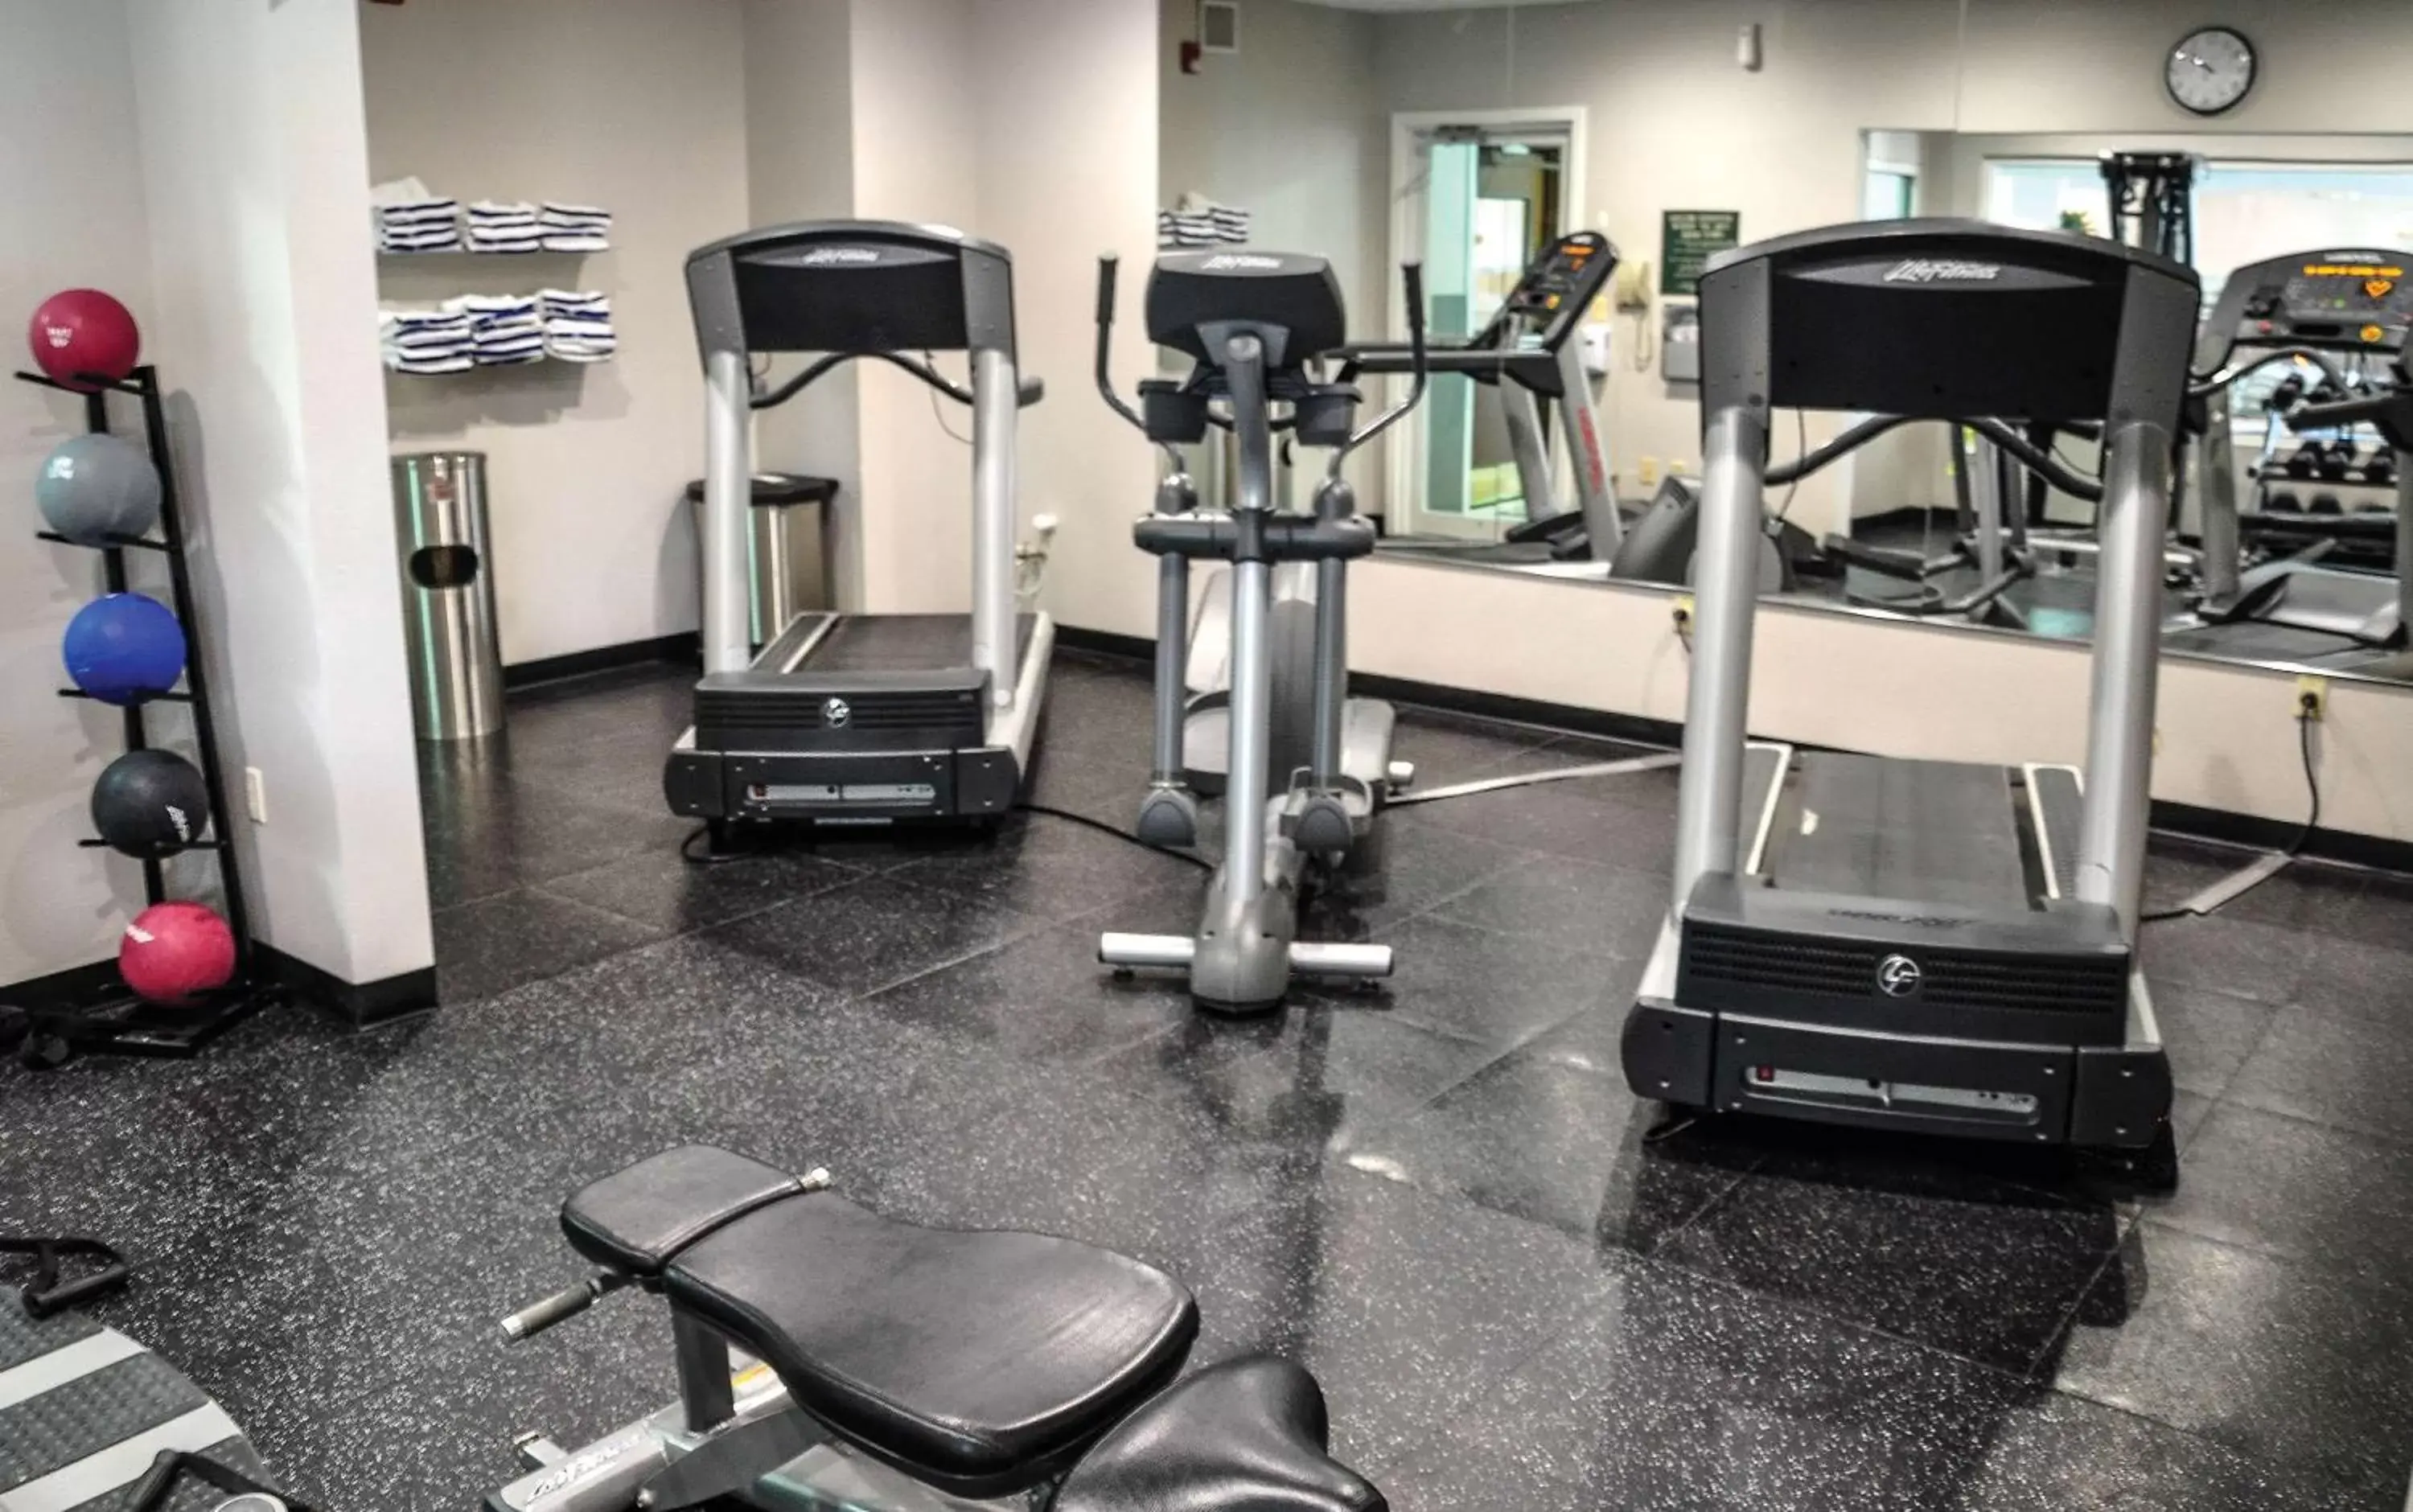 Activities, Fitness Center/Facilities in Country Inn & Suites by Radisson, Fairborn South, OH